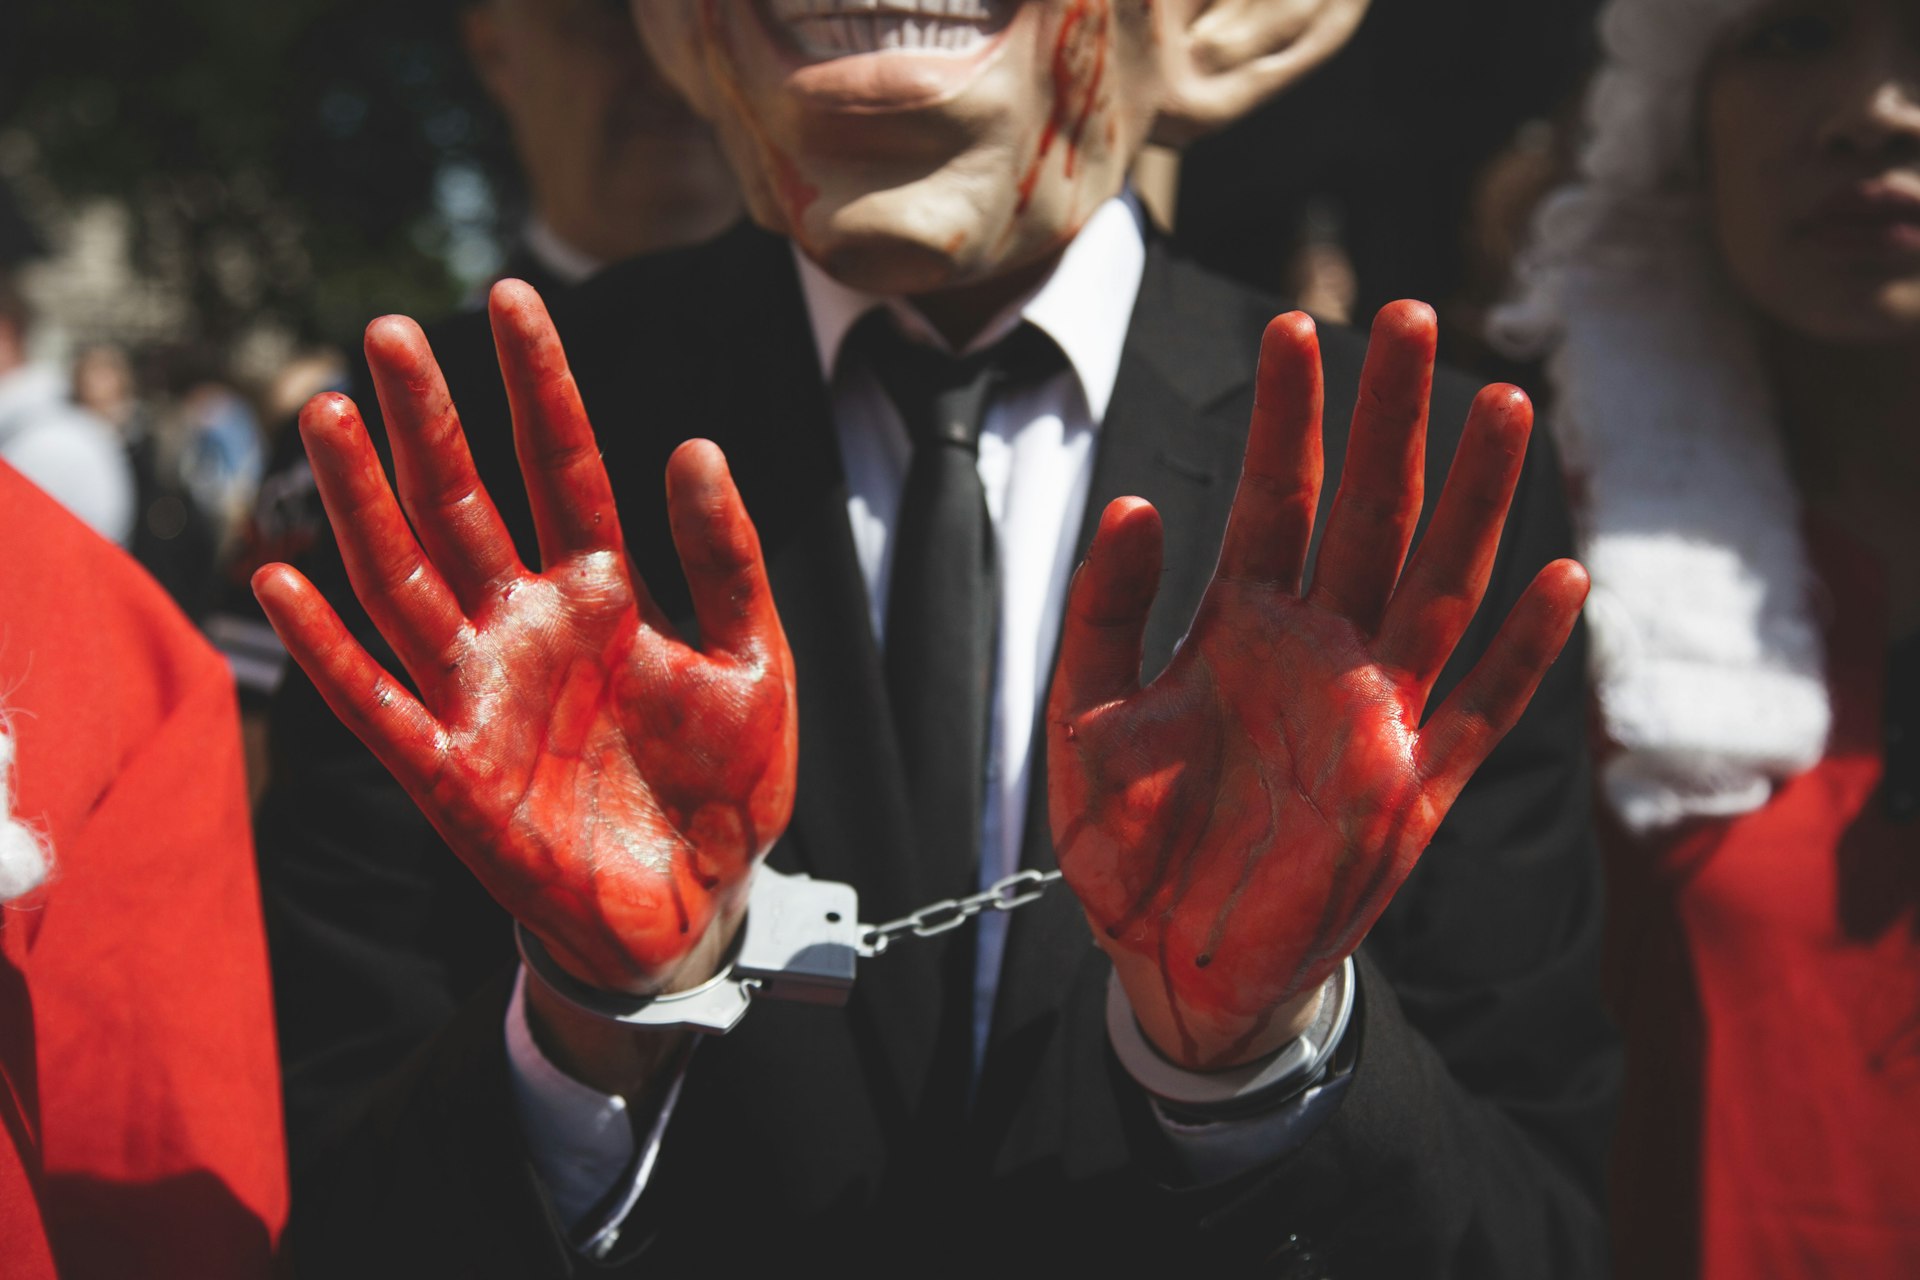 Blood on his hands: Should Tony Blair be prosecuted for war crimes?